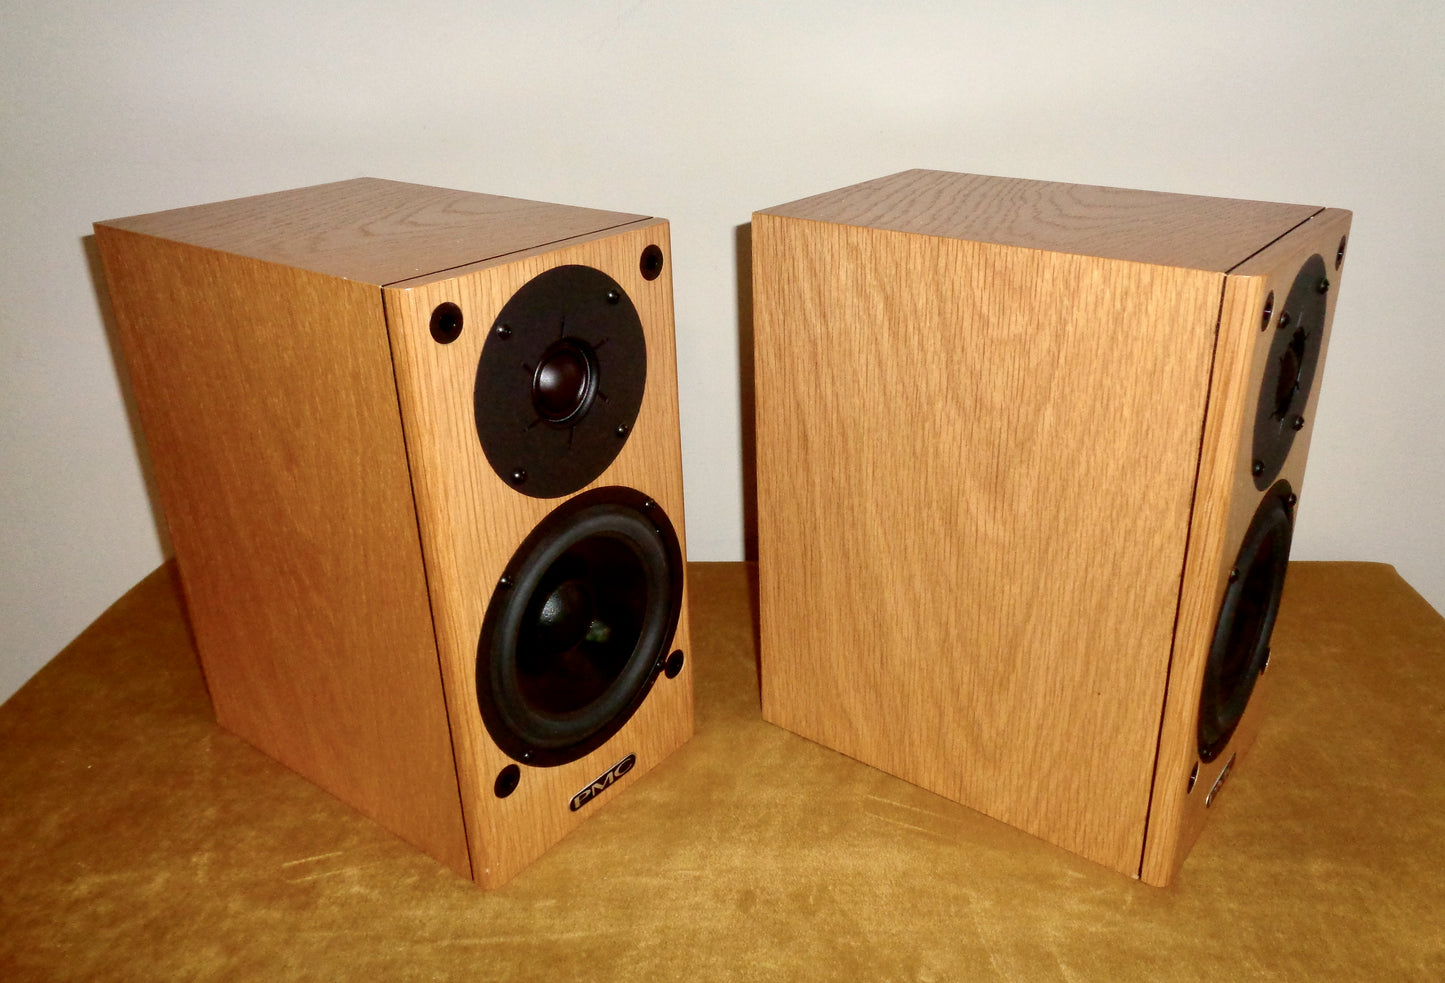 Pair of PMC DB1i Audio HiFi Speakers In Oak. Brand New In Their Original Box With Instructions